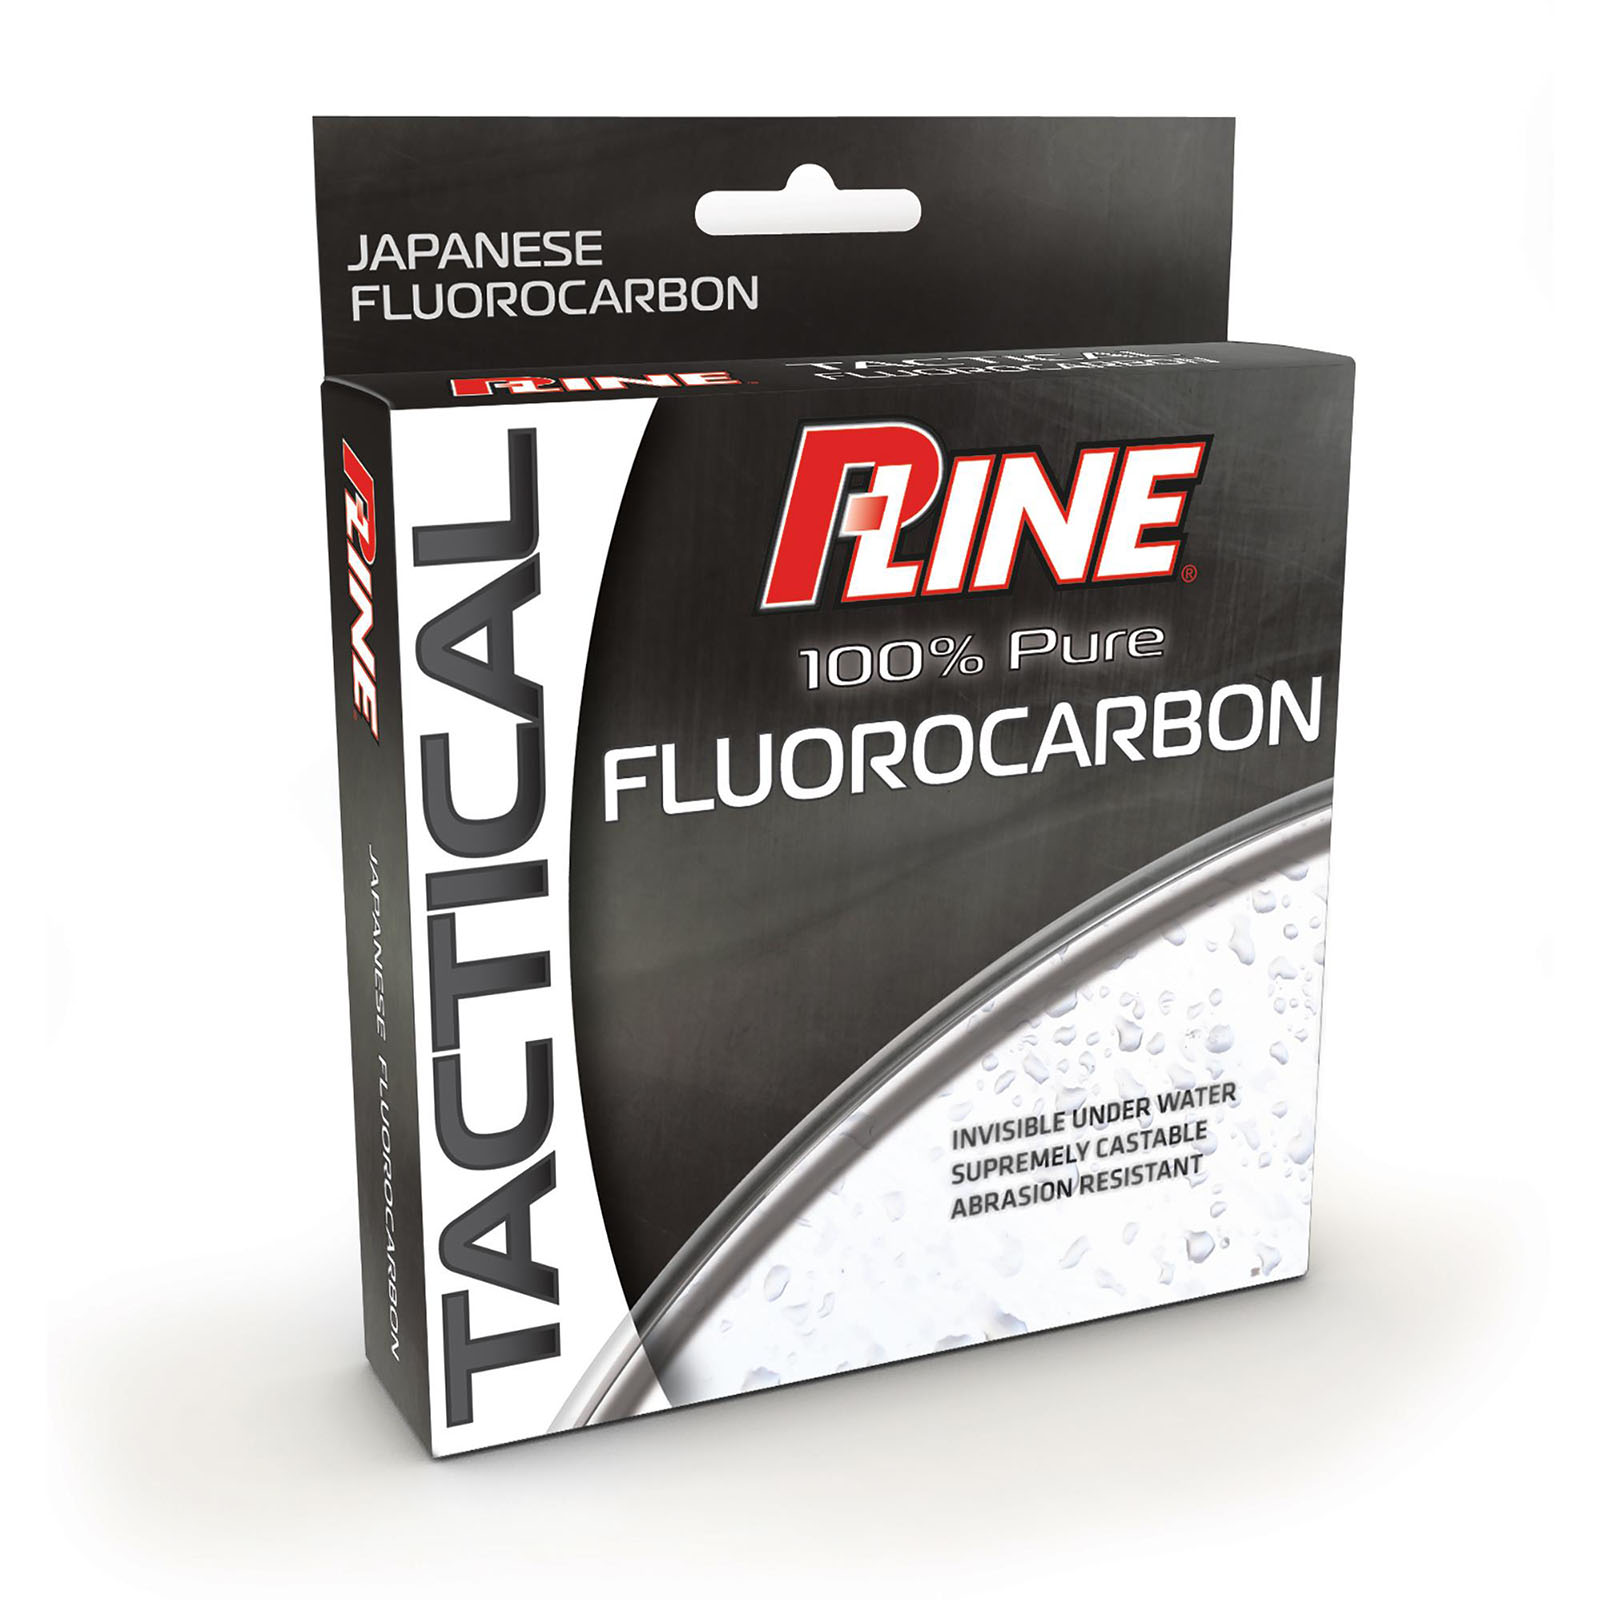 P-Line Tactical Fluorocarbon Fishing Line Review 